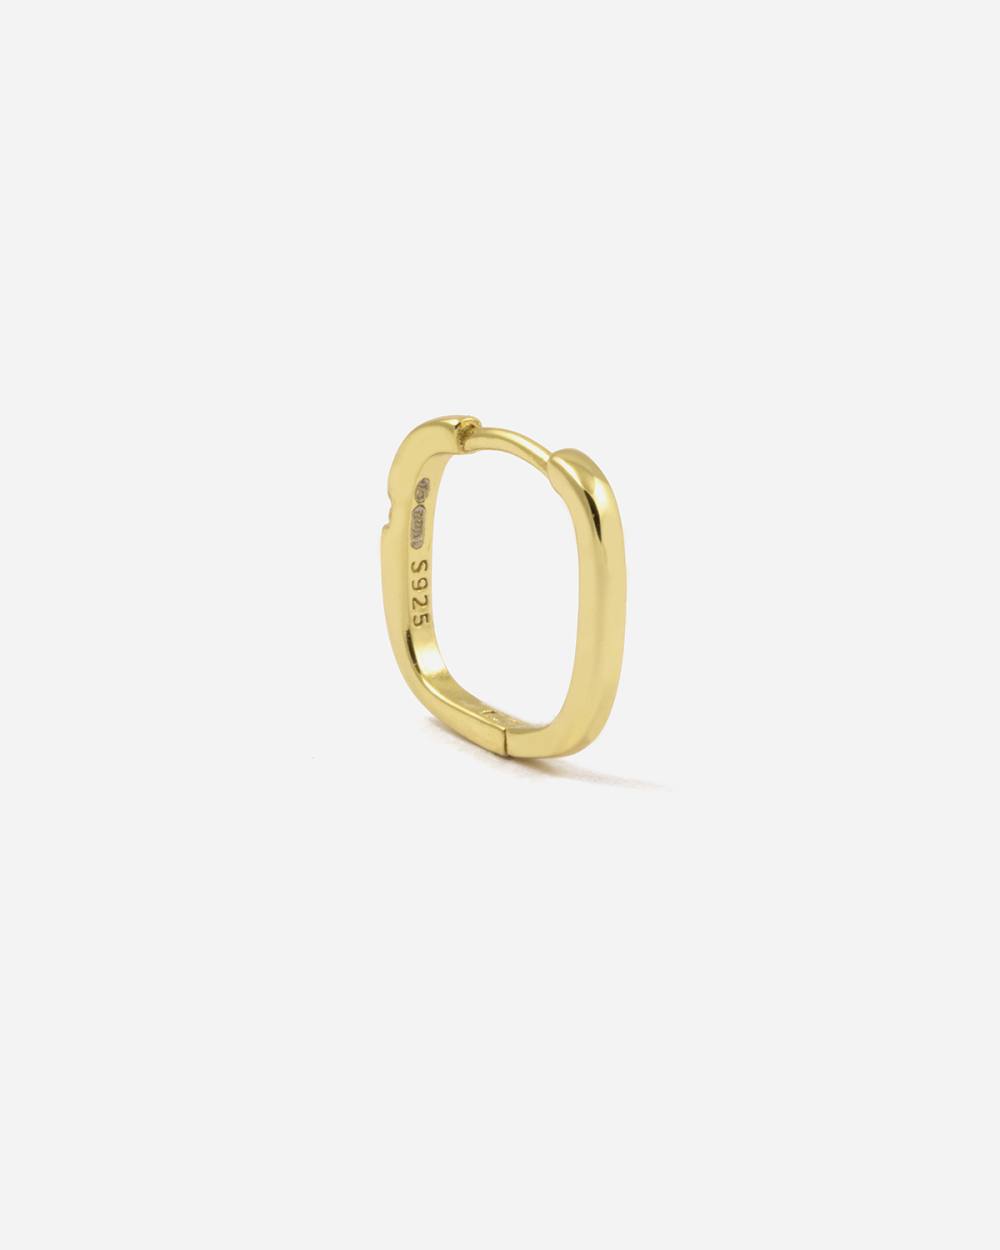 SQUARE SINGLE EARRING / YELLOW GOLD